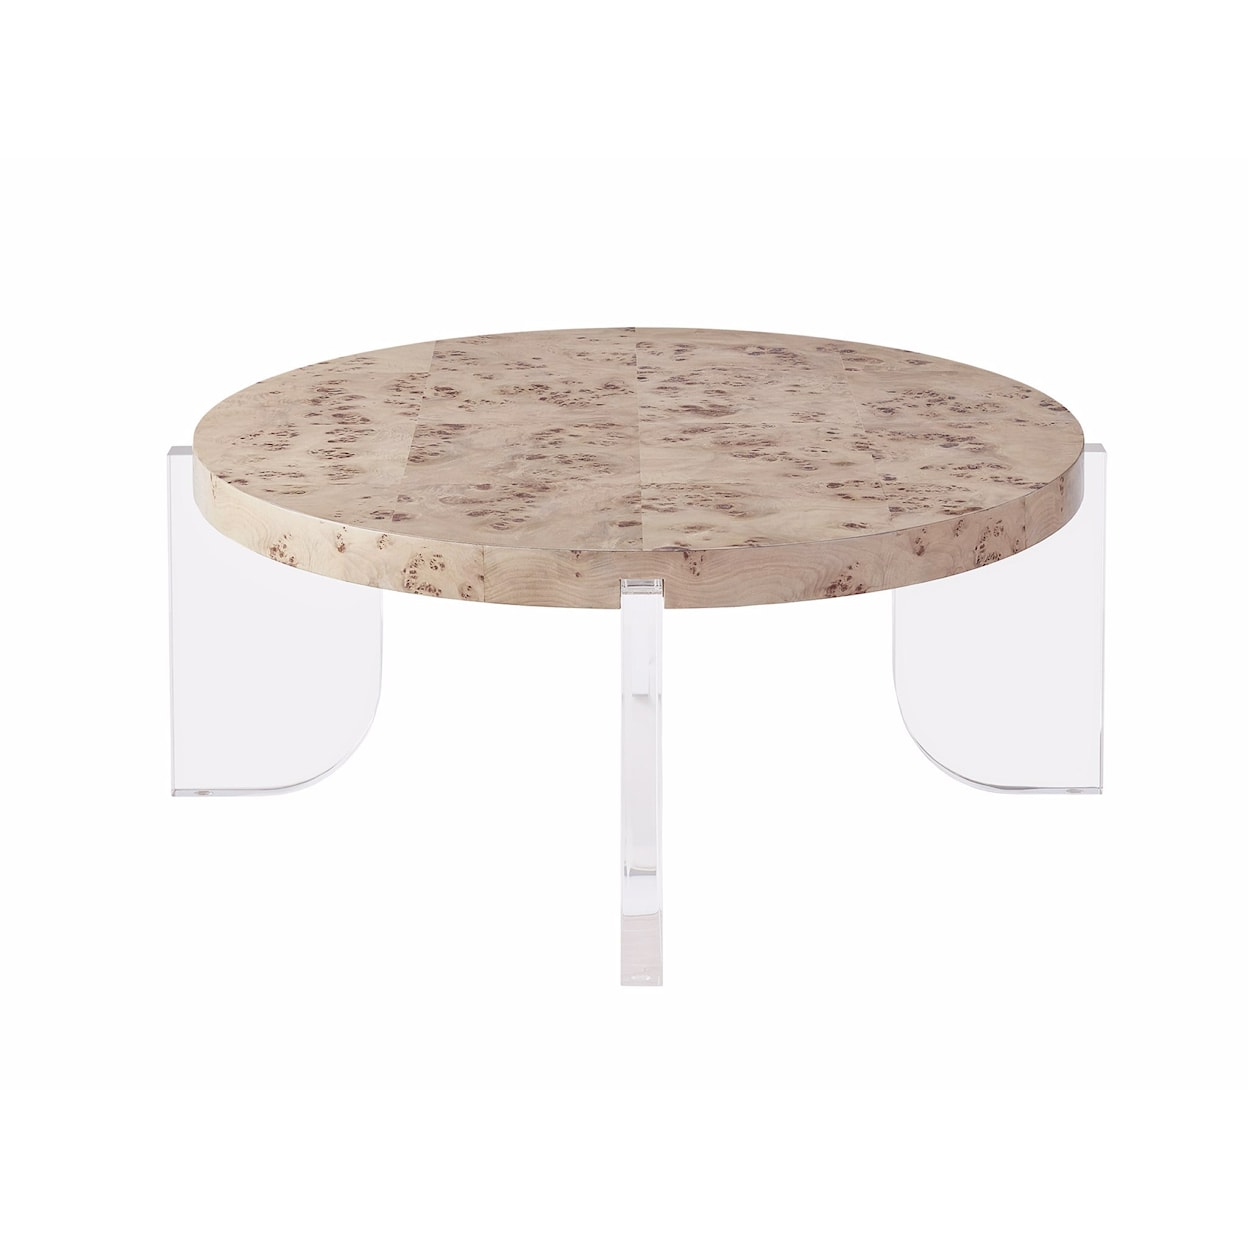 Universal Tranquility - Miranda Kerr Home Aerial Cocktail Table